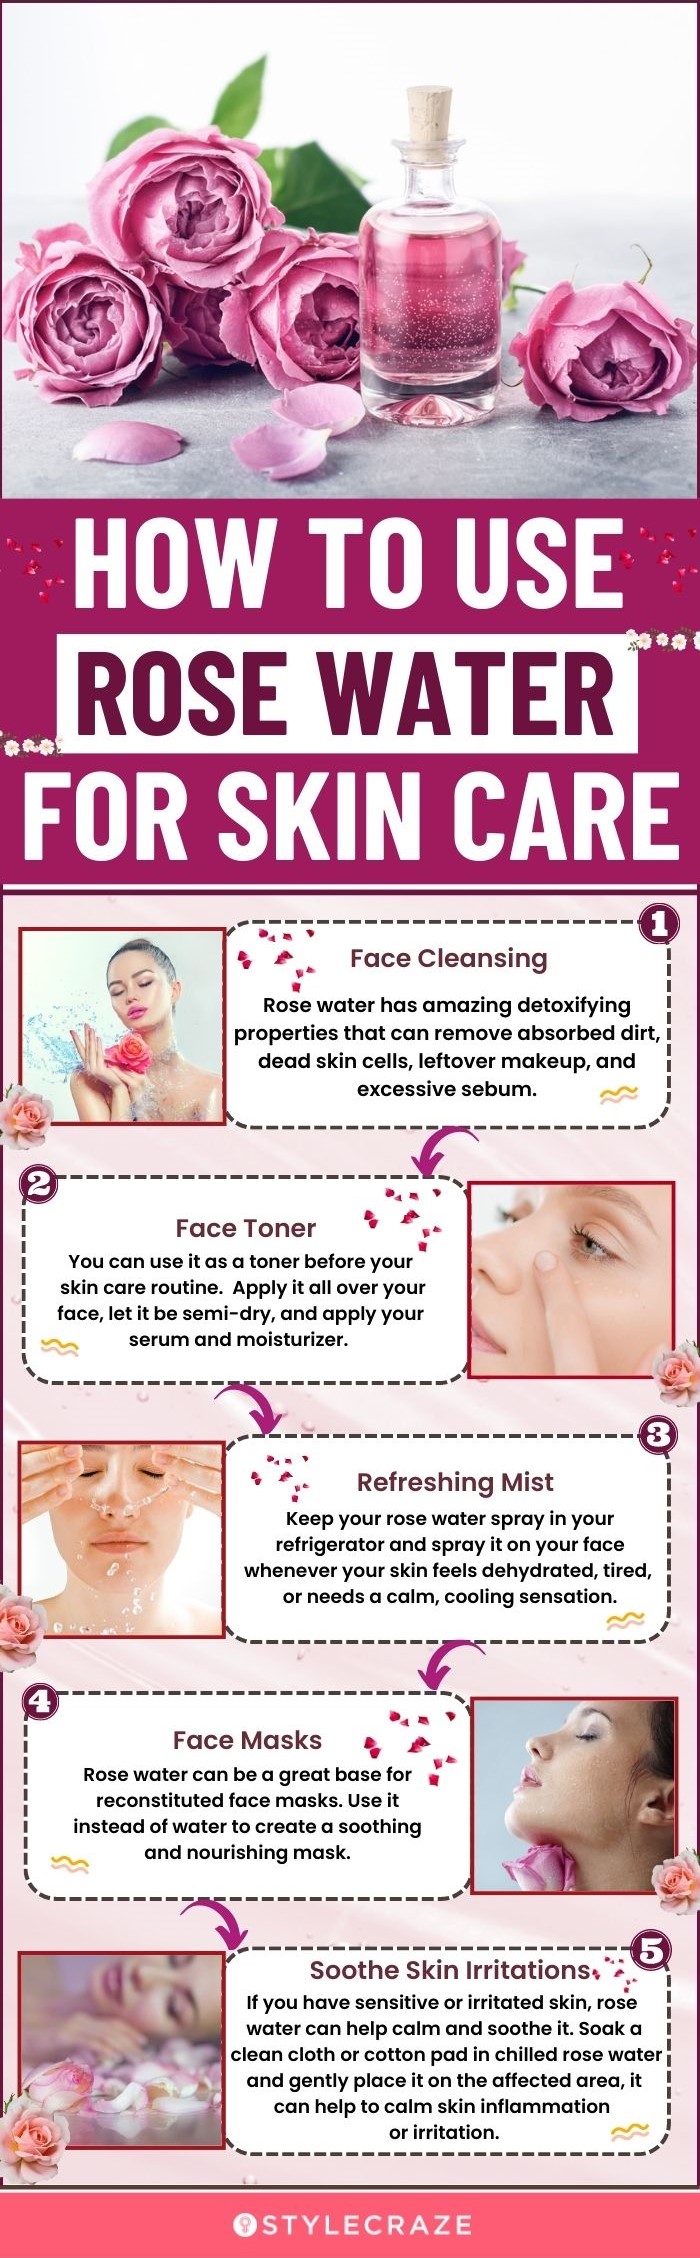 How To Use Rose Water For Skin Care (infographic)